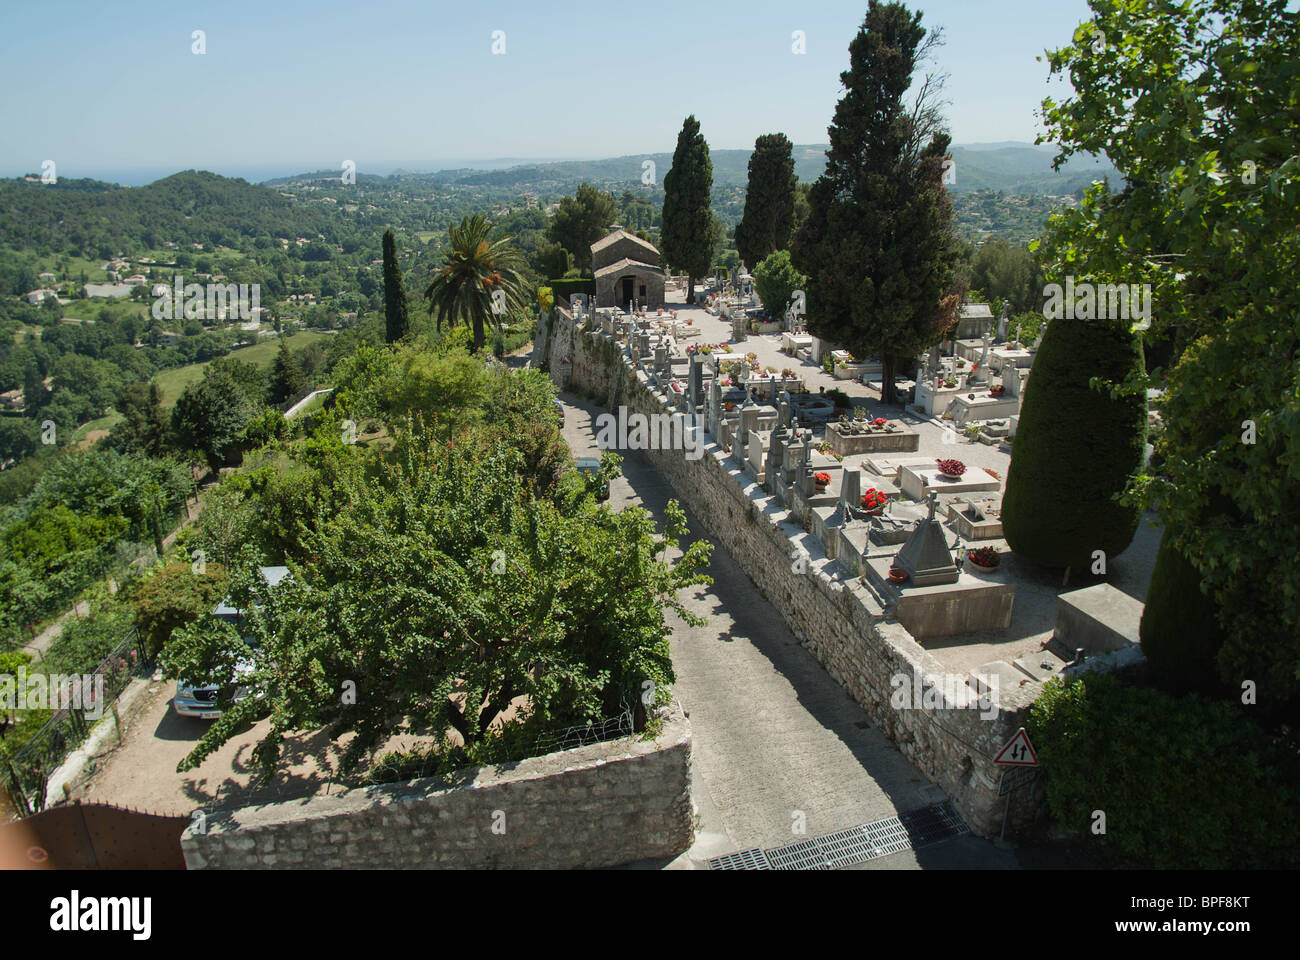 Vie of the hilltop cemetary in St. Paul De Vence. Stock Photo